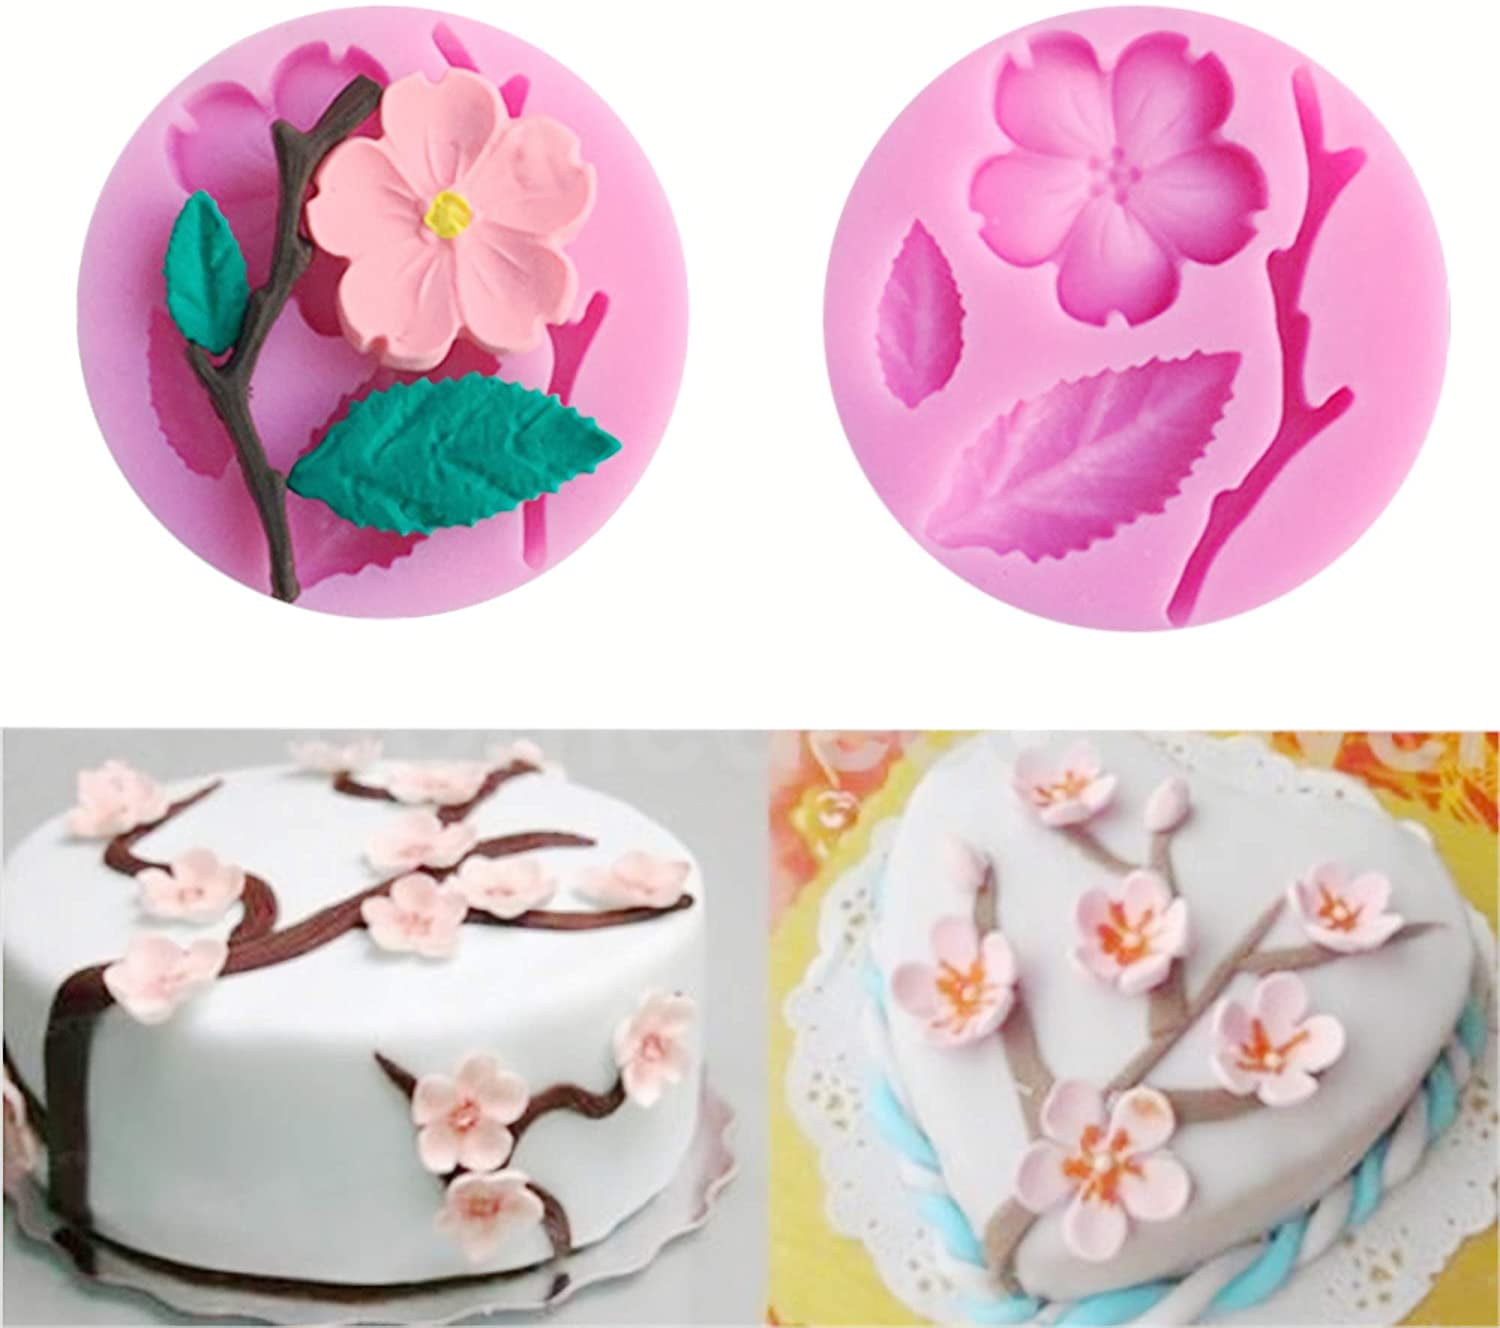 Silicone Cake Mold 3D Leaf Shape Fondant Decorating Bakeware Tool Accessories LP 